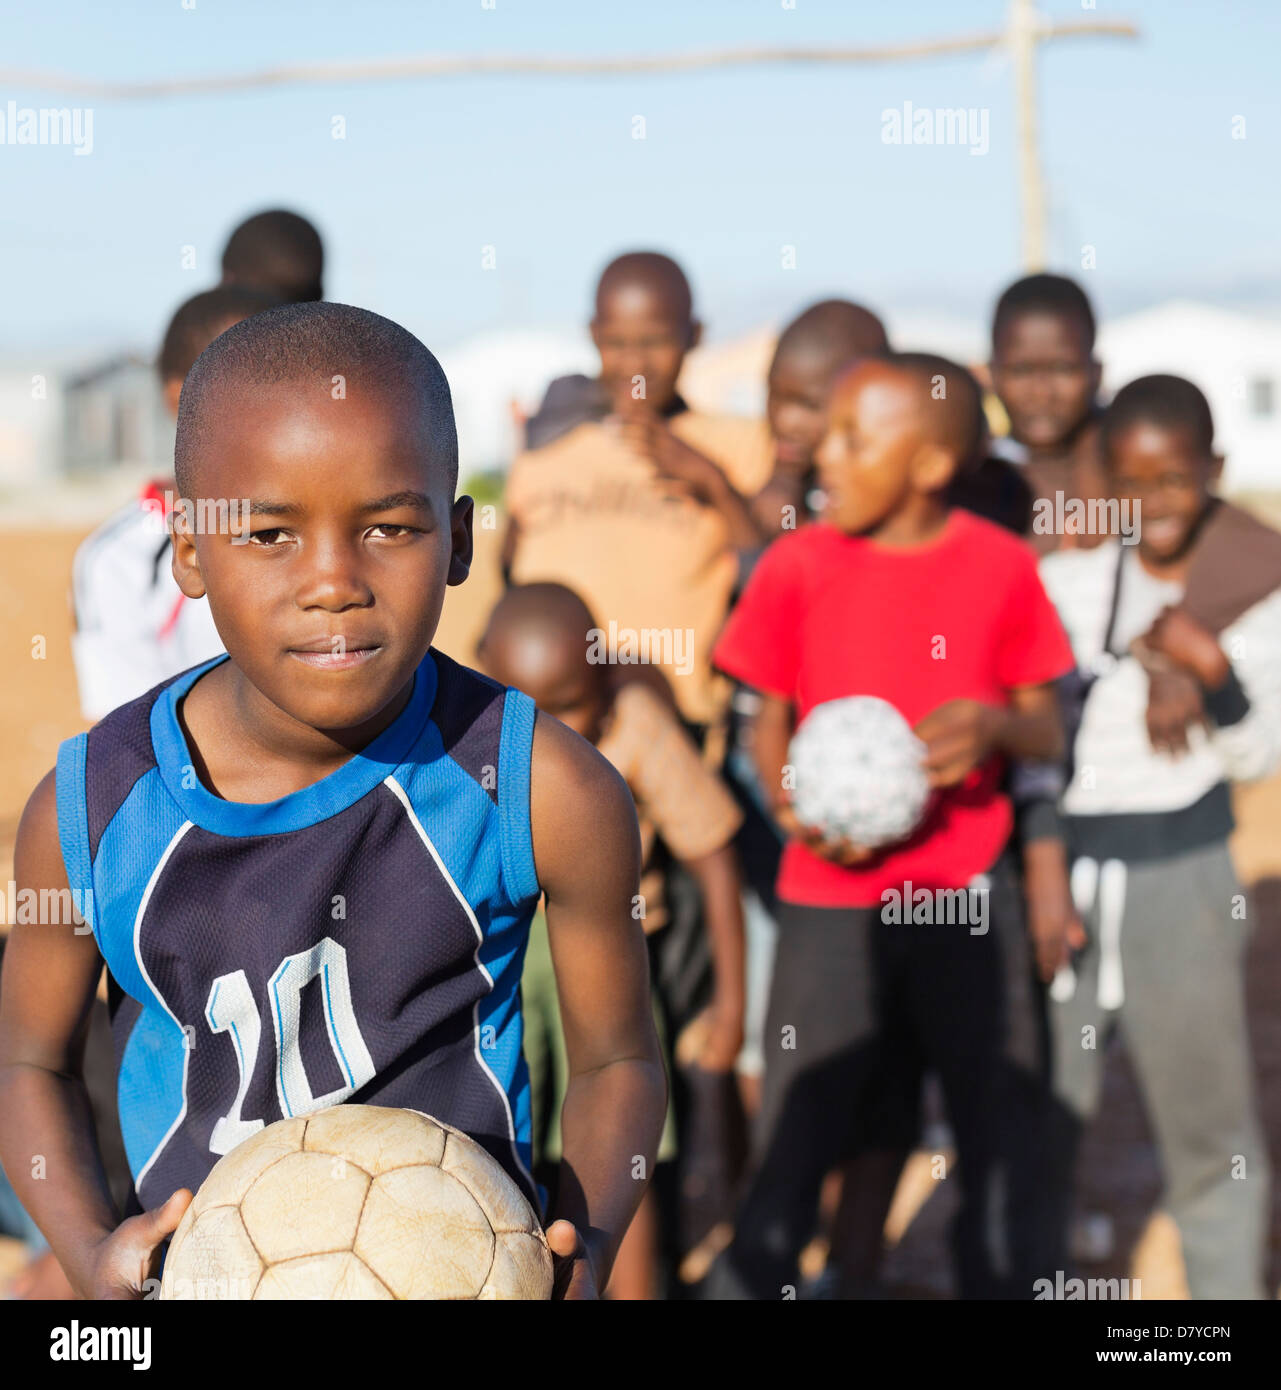 Boys holding soccer balls in dirt field Banque D'Images